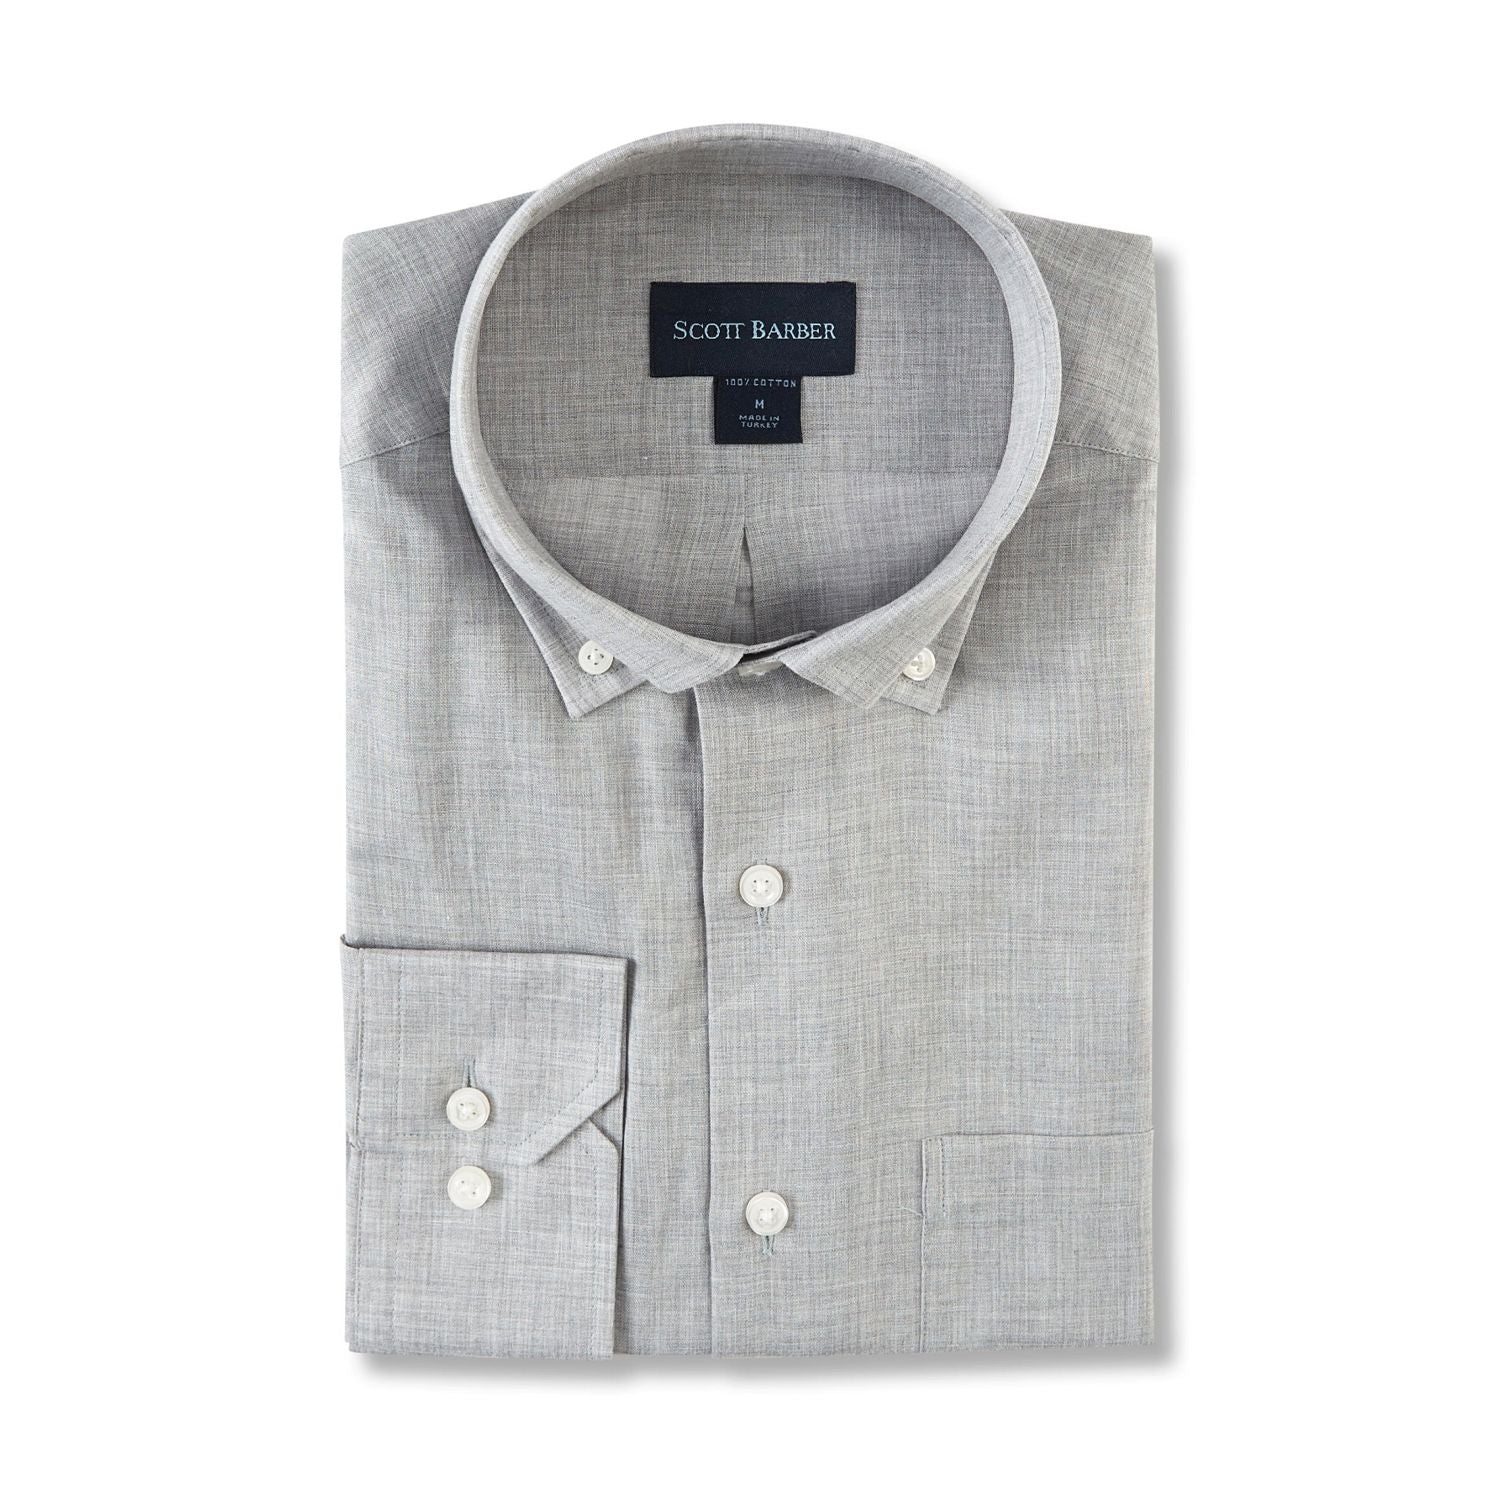 Heathered Chambray Sport Shirt in Mist by Scott Barber